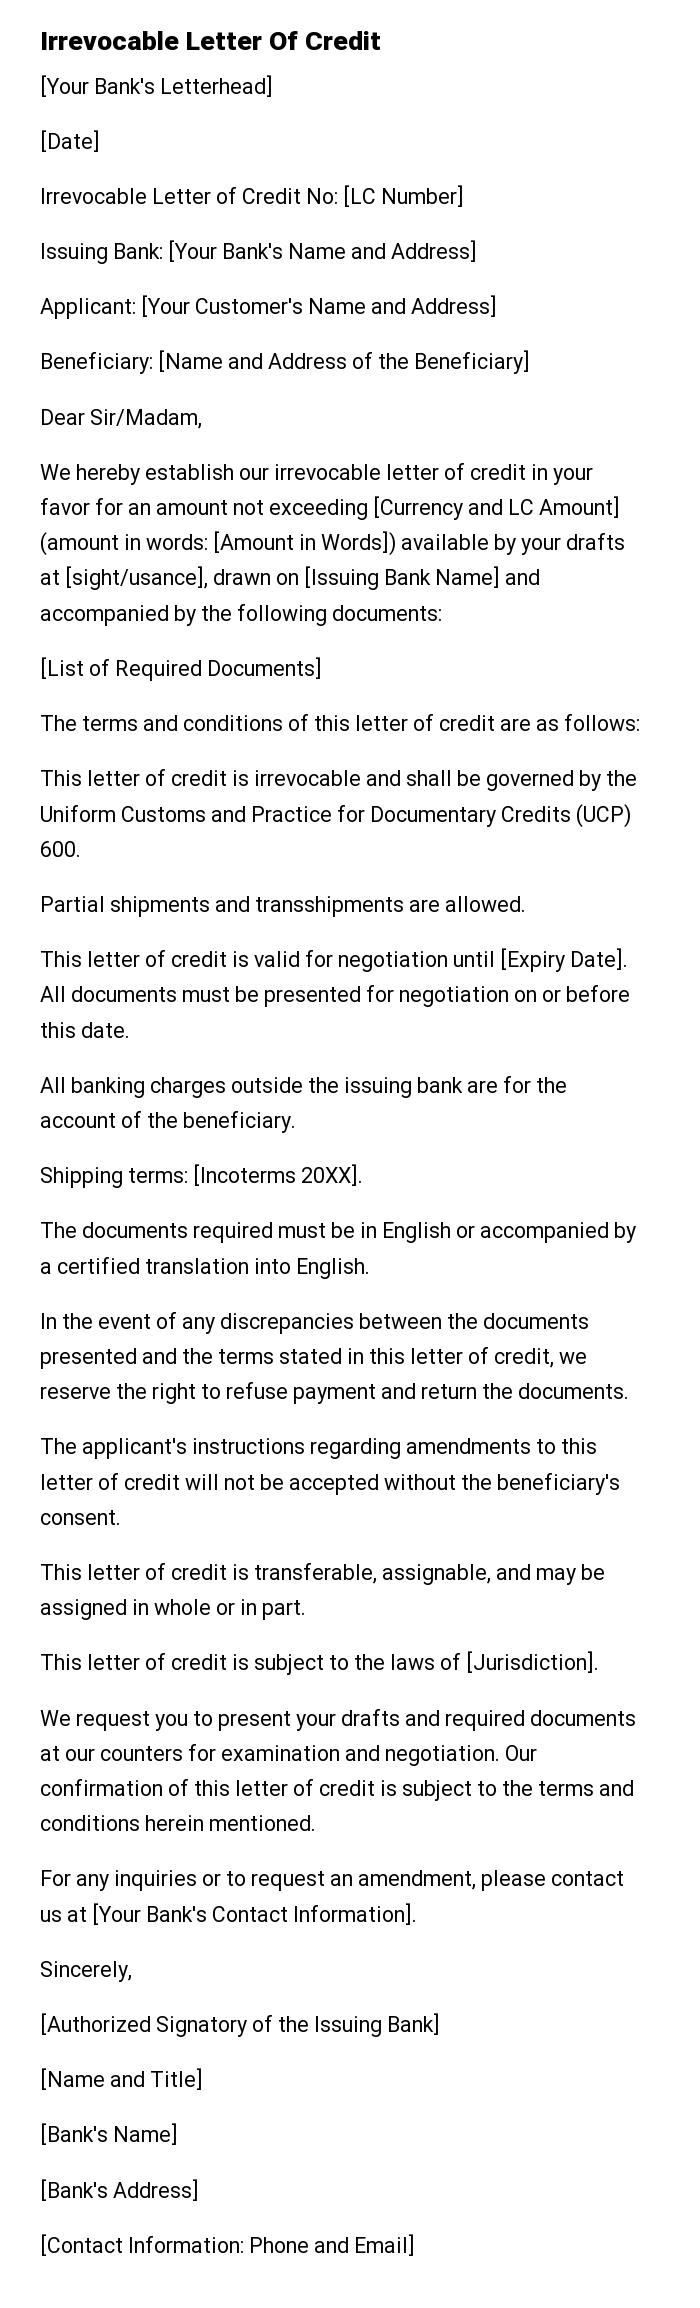 Irrevocable Letter Of Credit